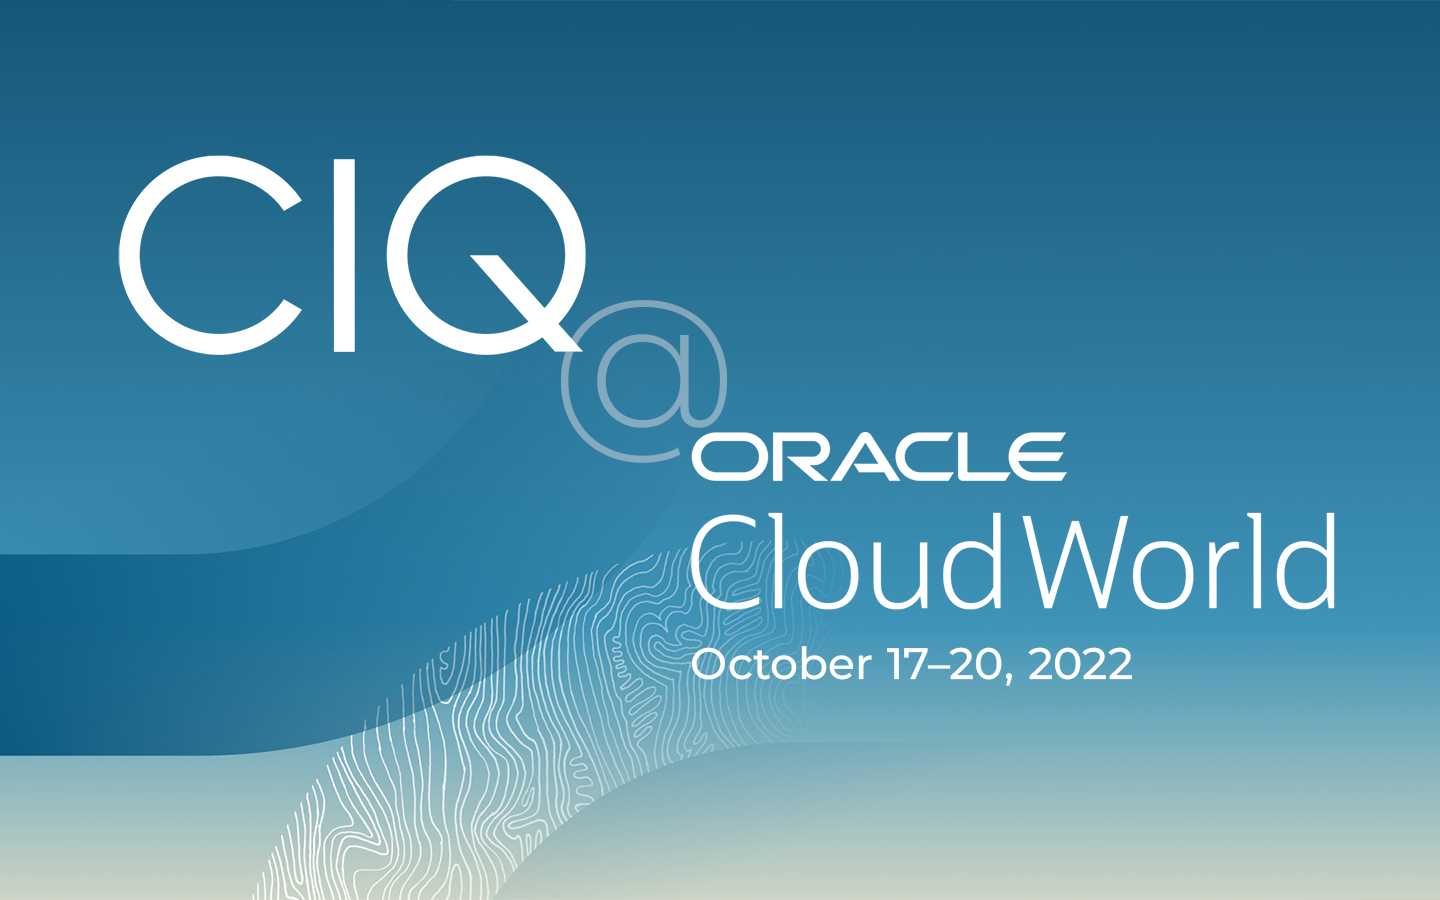 Don’t Miss Our Sessions at Oracle CloudWorld 2022